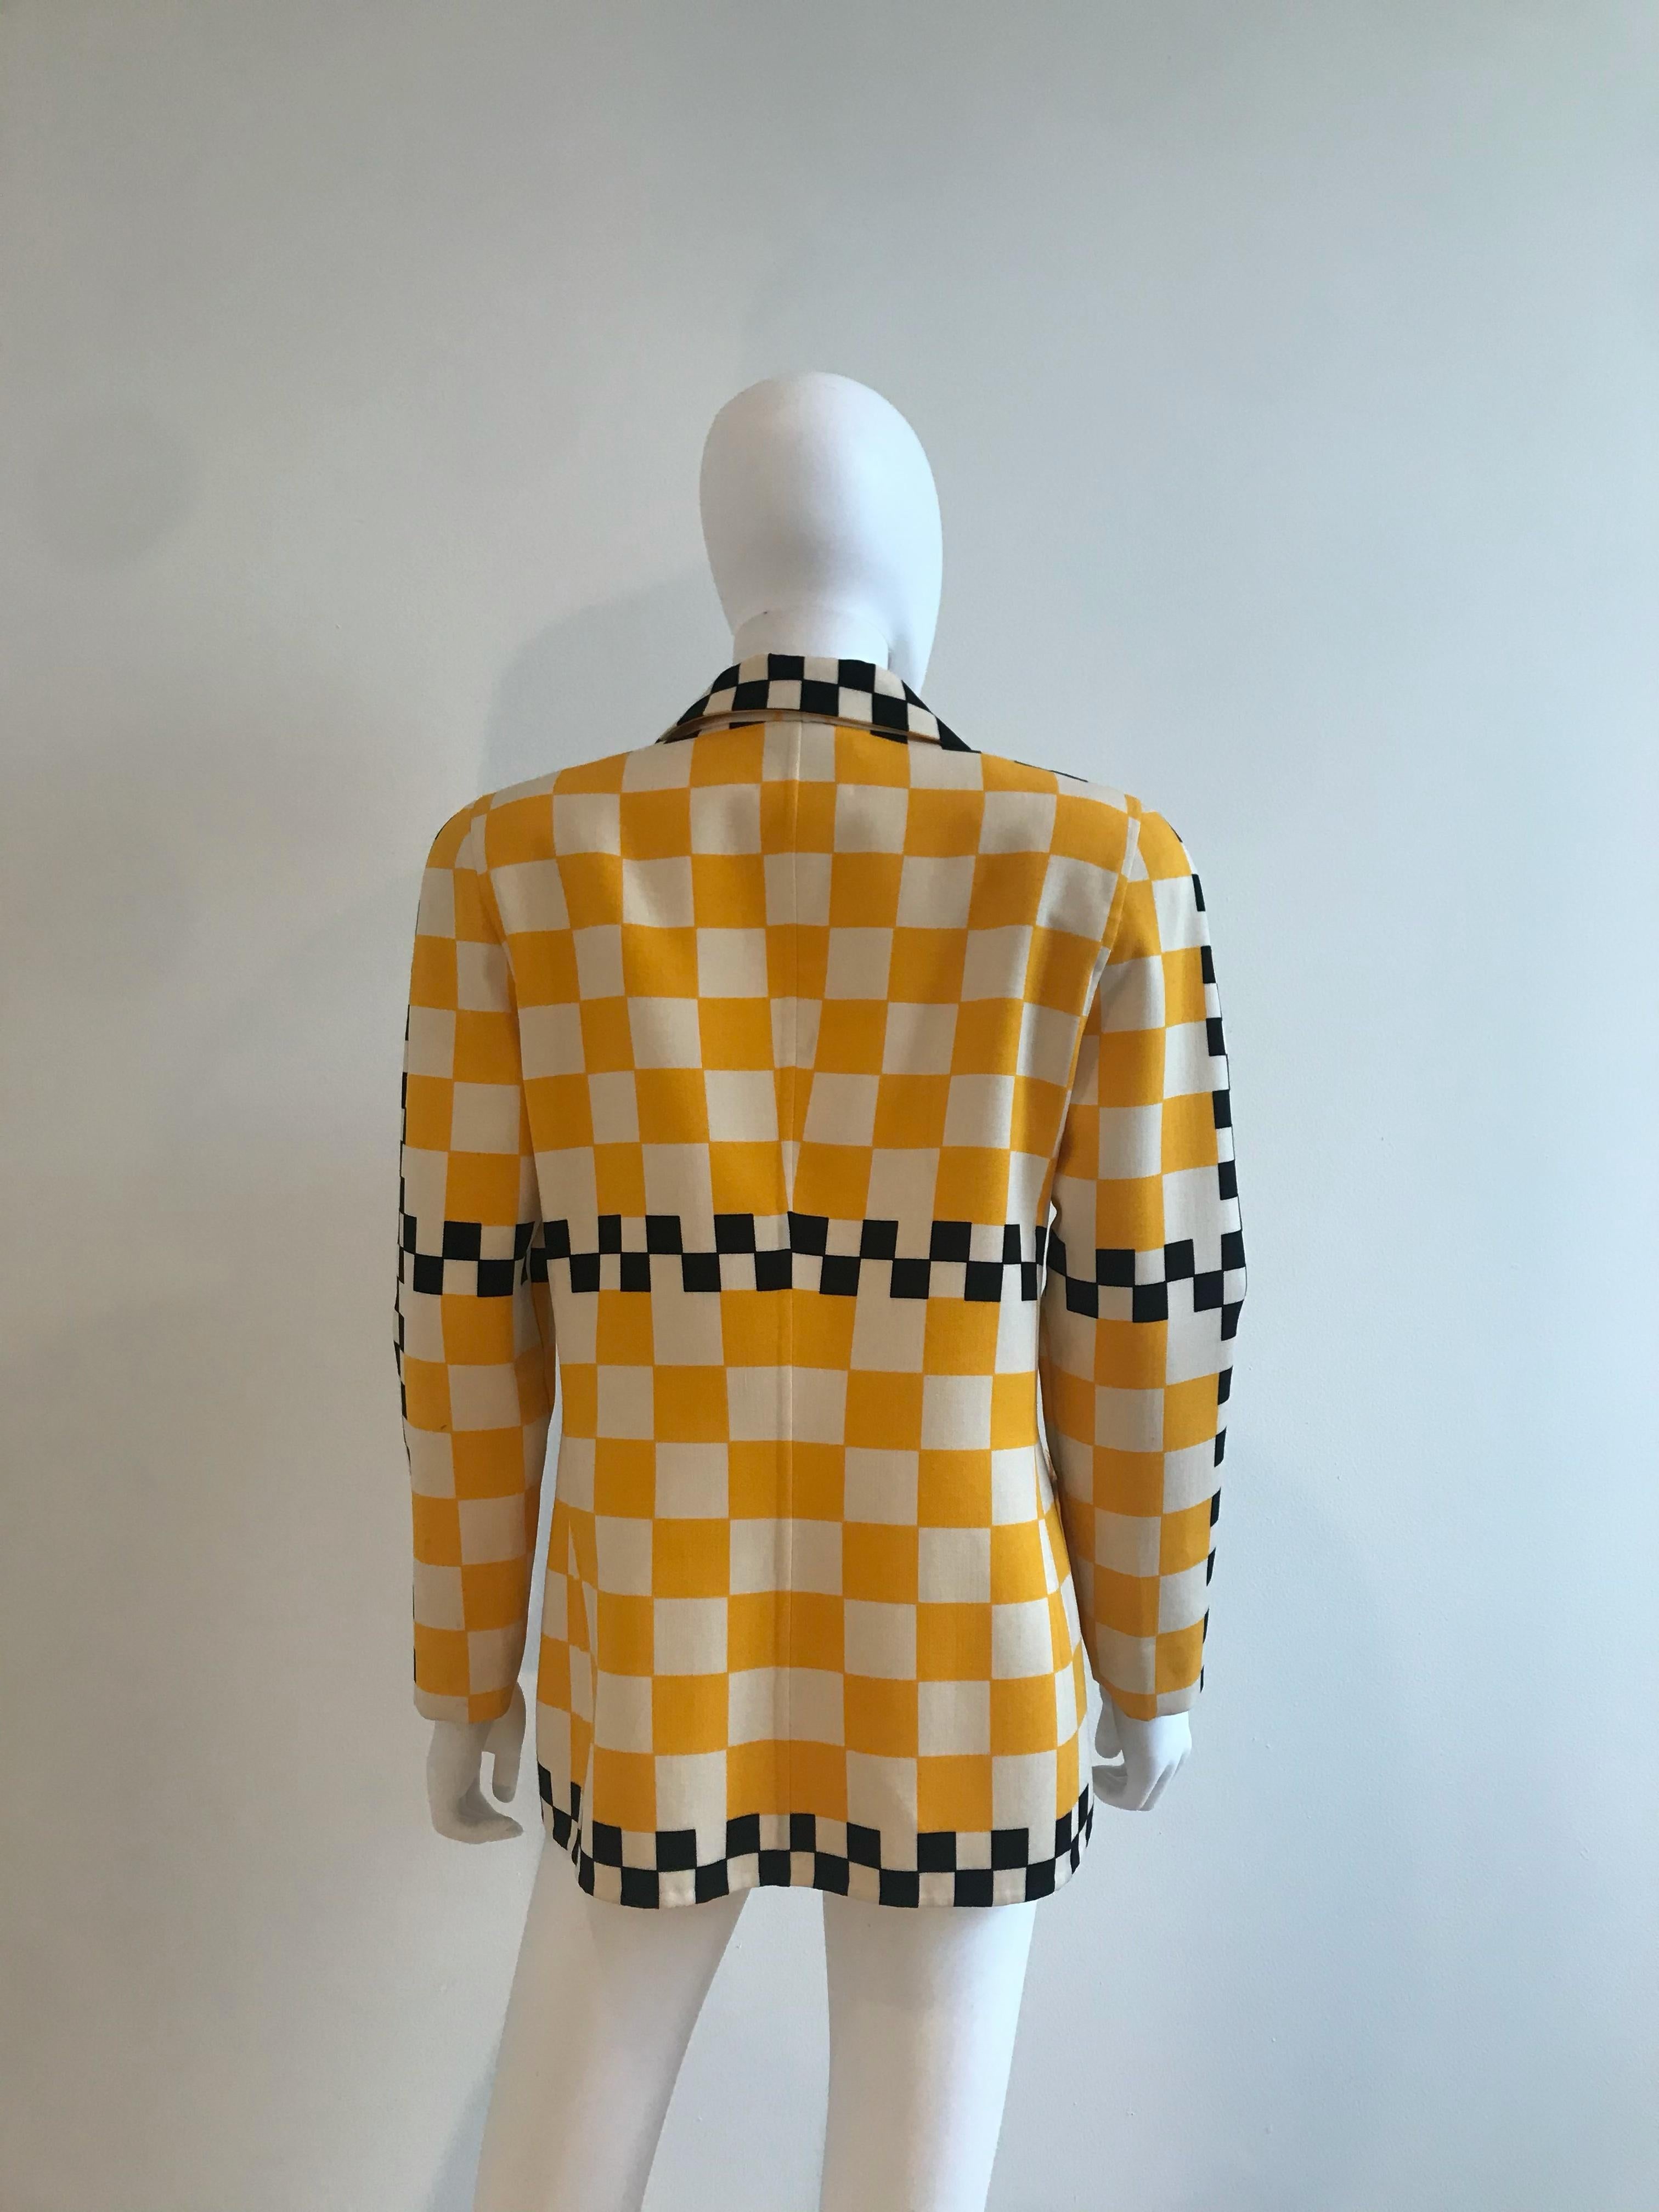 Bill Blass Taxi Checkered Print Blazer In Good Condition For Sale In Brooklyn, NY